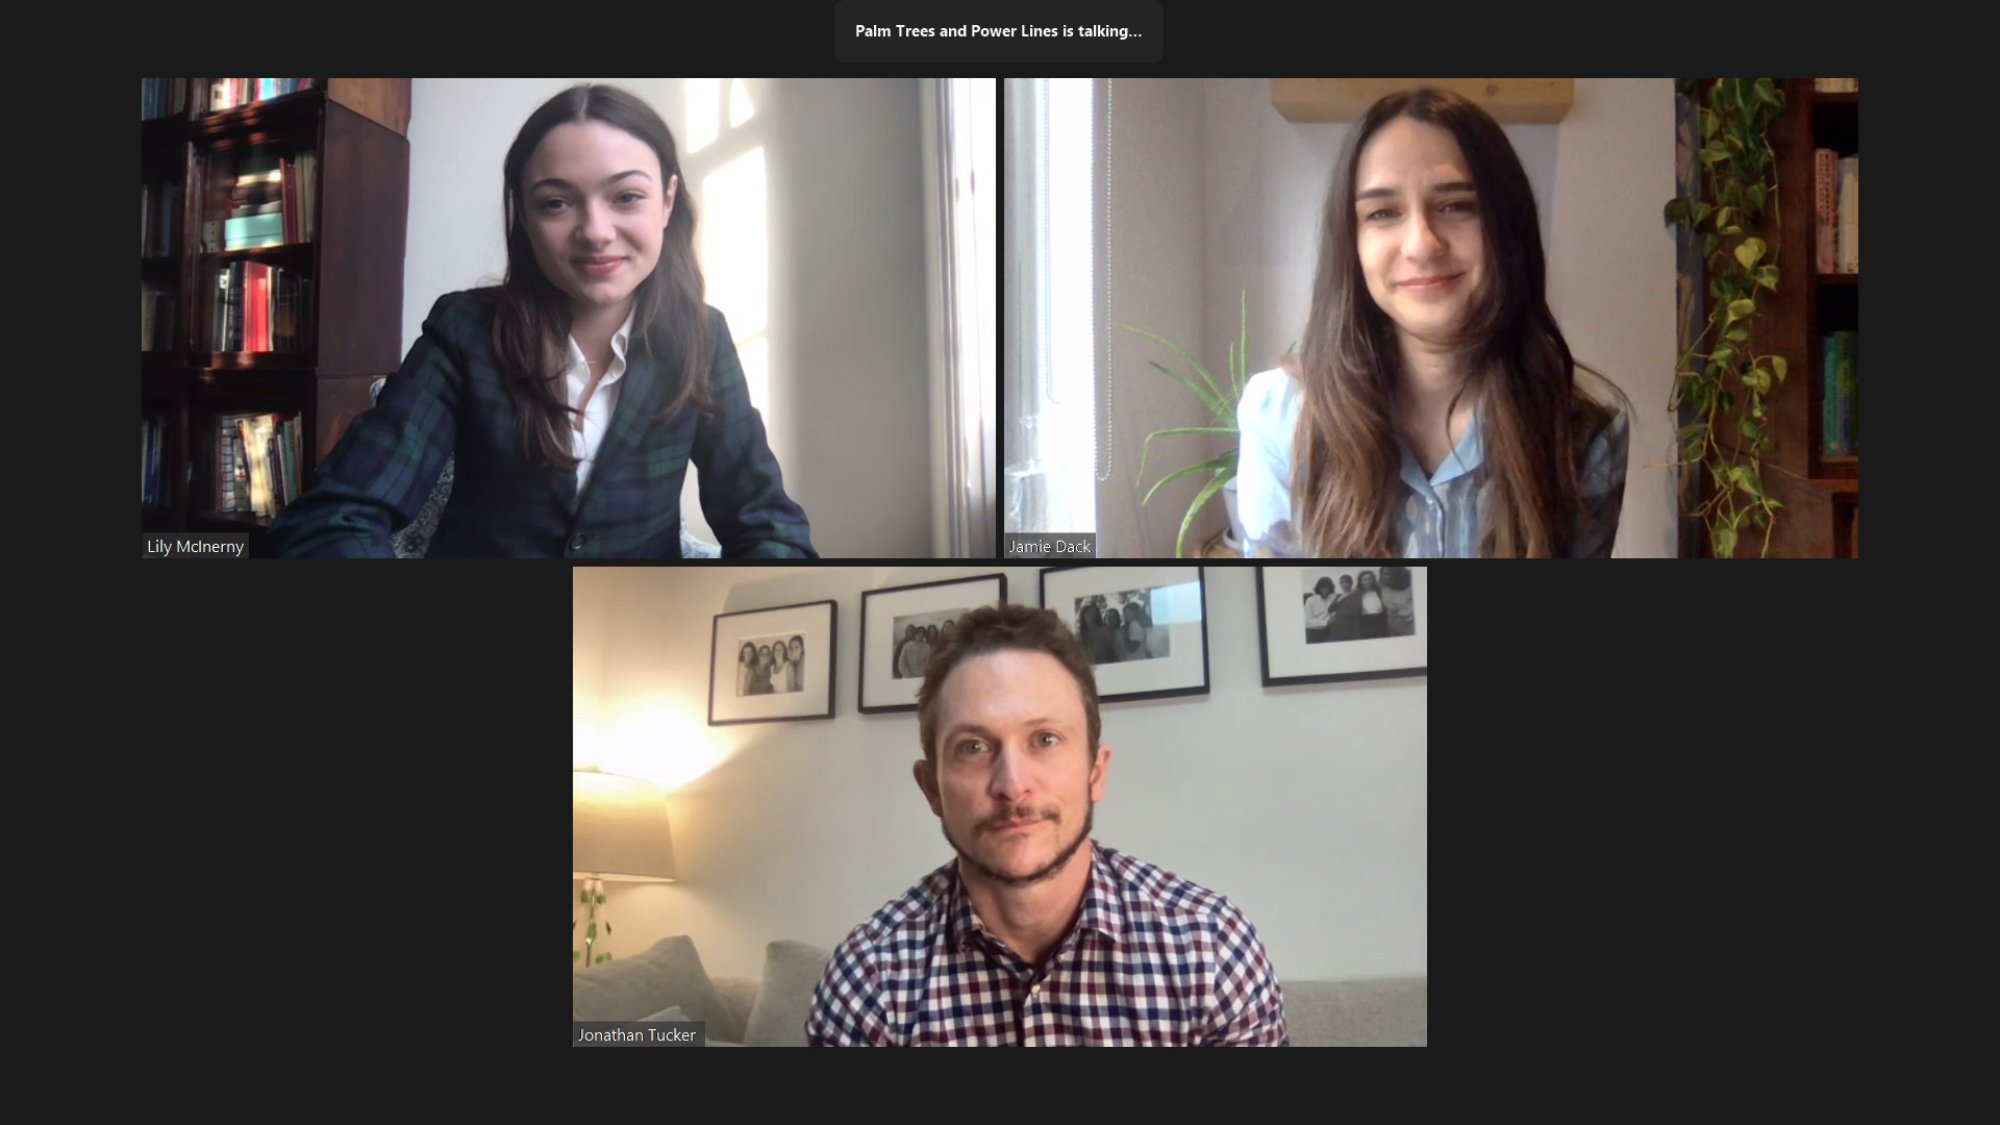 'Palm Trees and Power Lines' Lily McInerny, Jonathan Tucker, and Jamie Dack on a video call